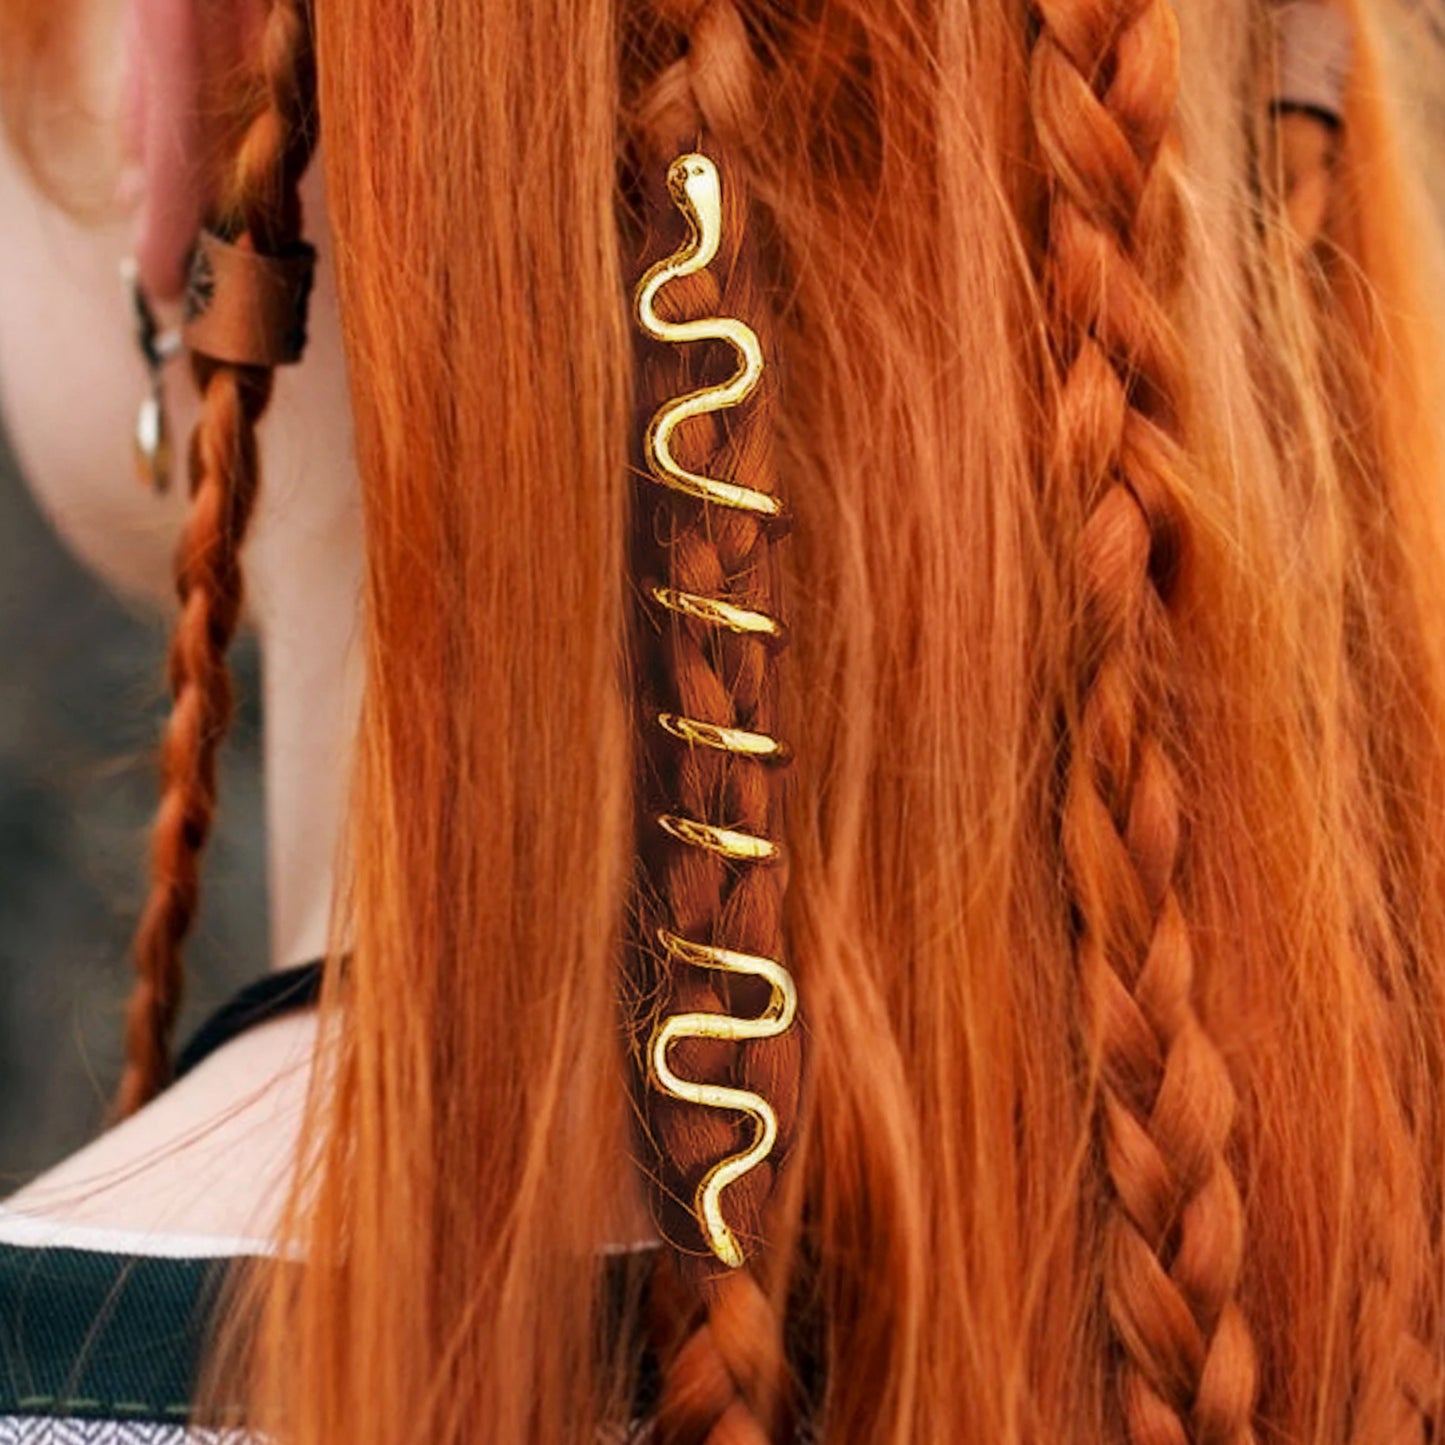 Load image into Gallery viewer, An image of a model with long red hair, partially in braids. Small bronze hair cuffs, shaped like snakes, are interwoven into her braids.
